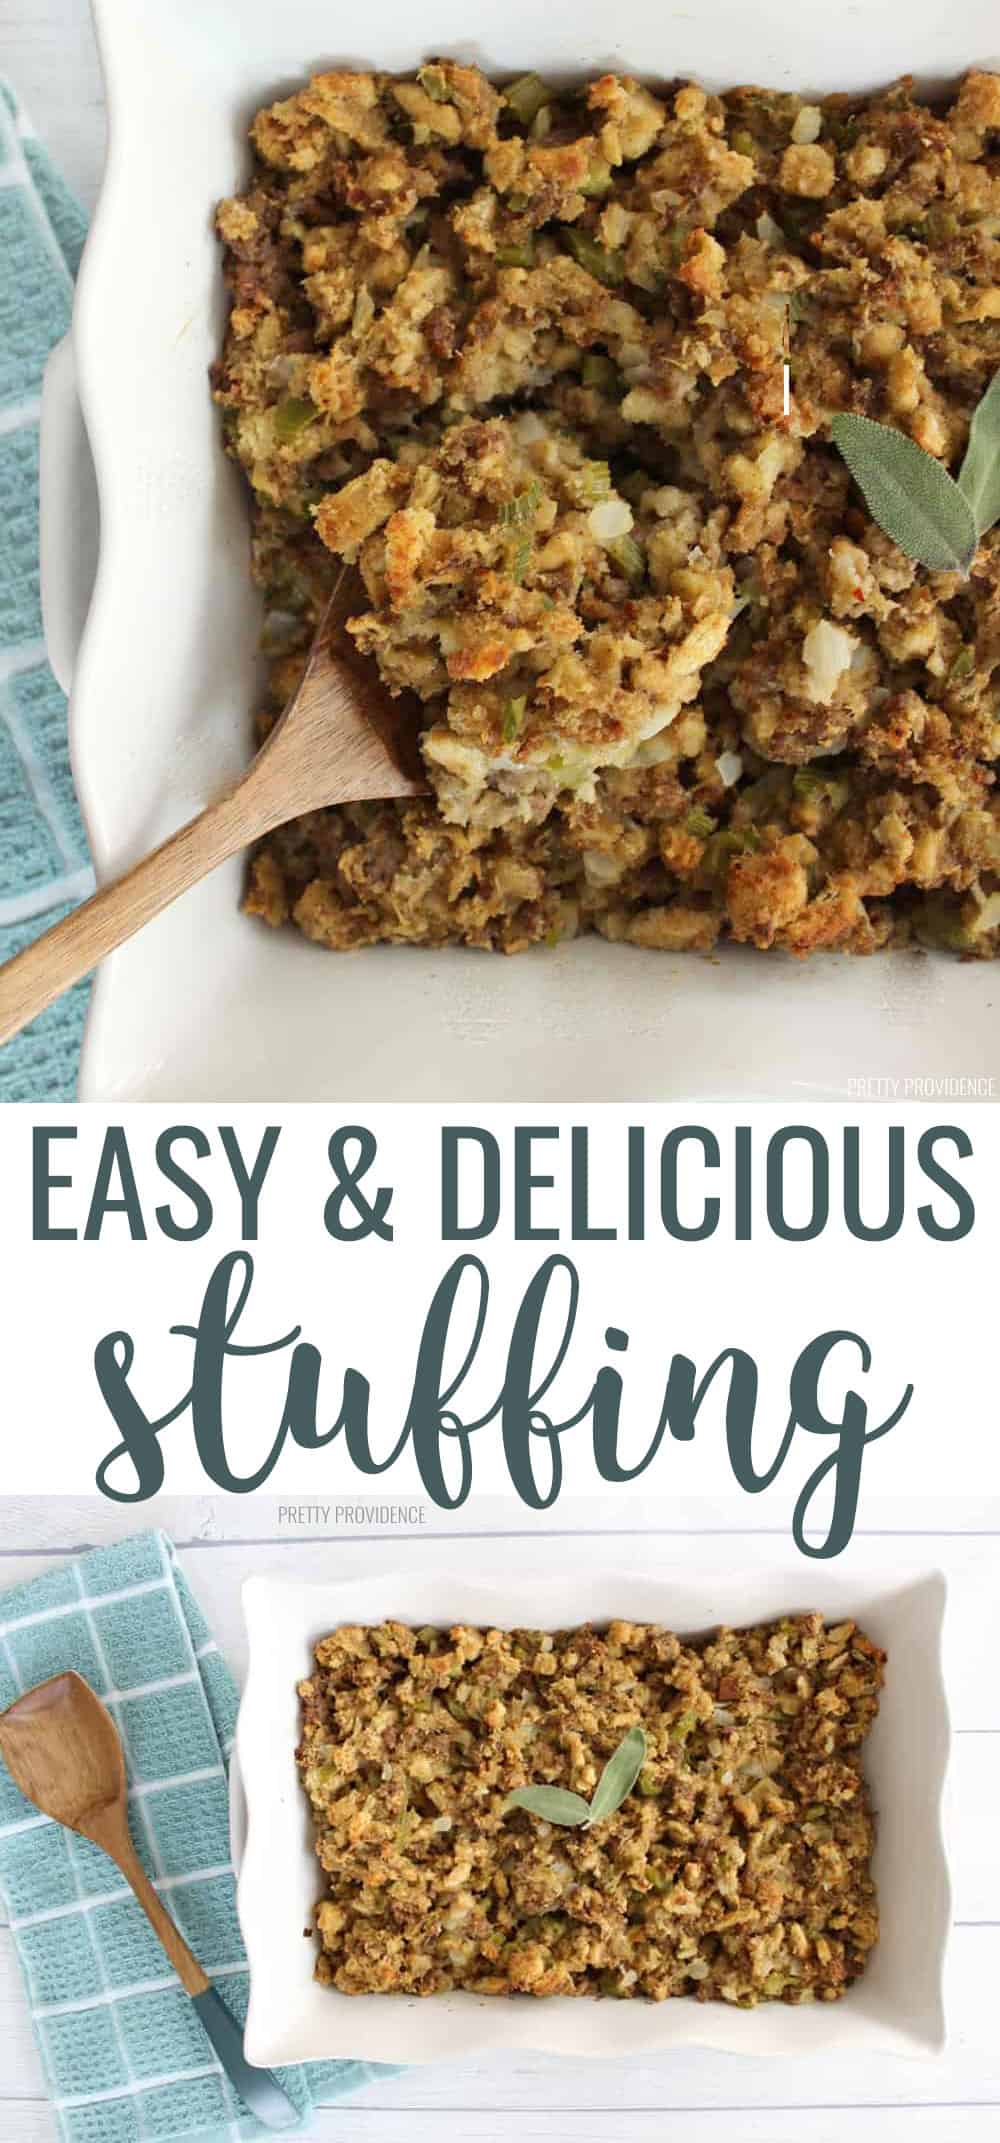 Best Stuffing Recipe Ever - With Make Ahead Instructions!